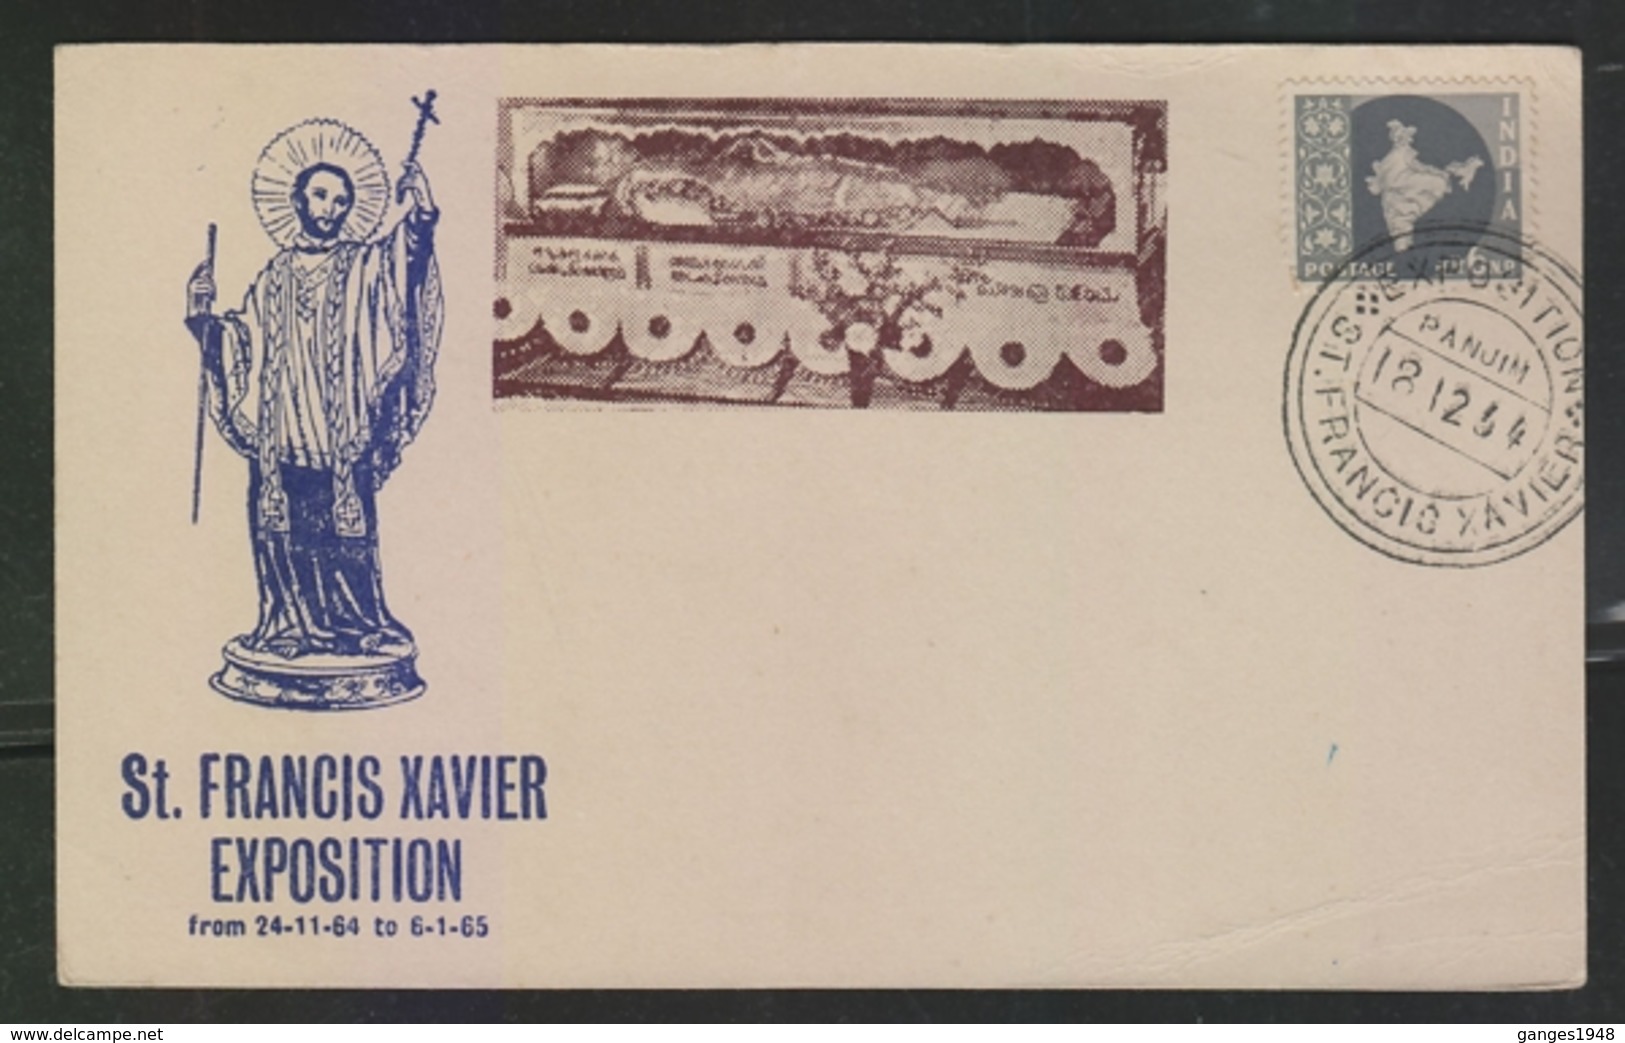 India  1964  St. Francis Xavier  Exposition  Panjim  Goa Special Card  # 21432  D  Inde  Indien - Covers & Documents